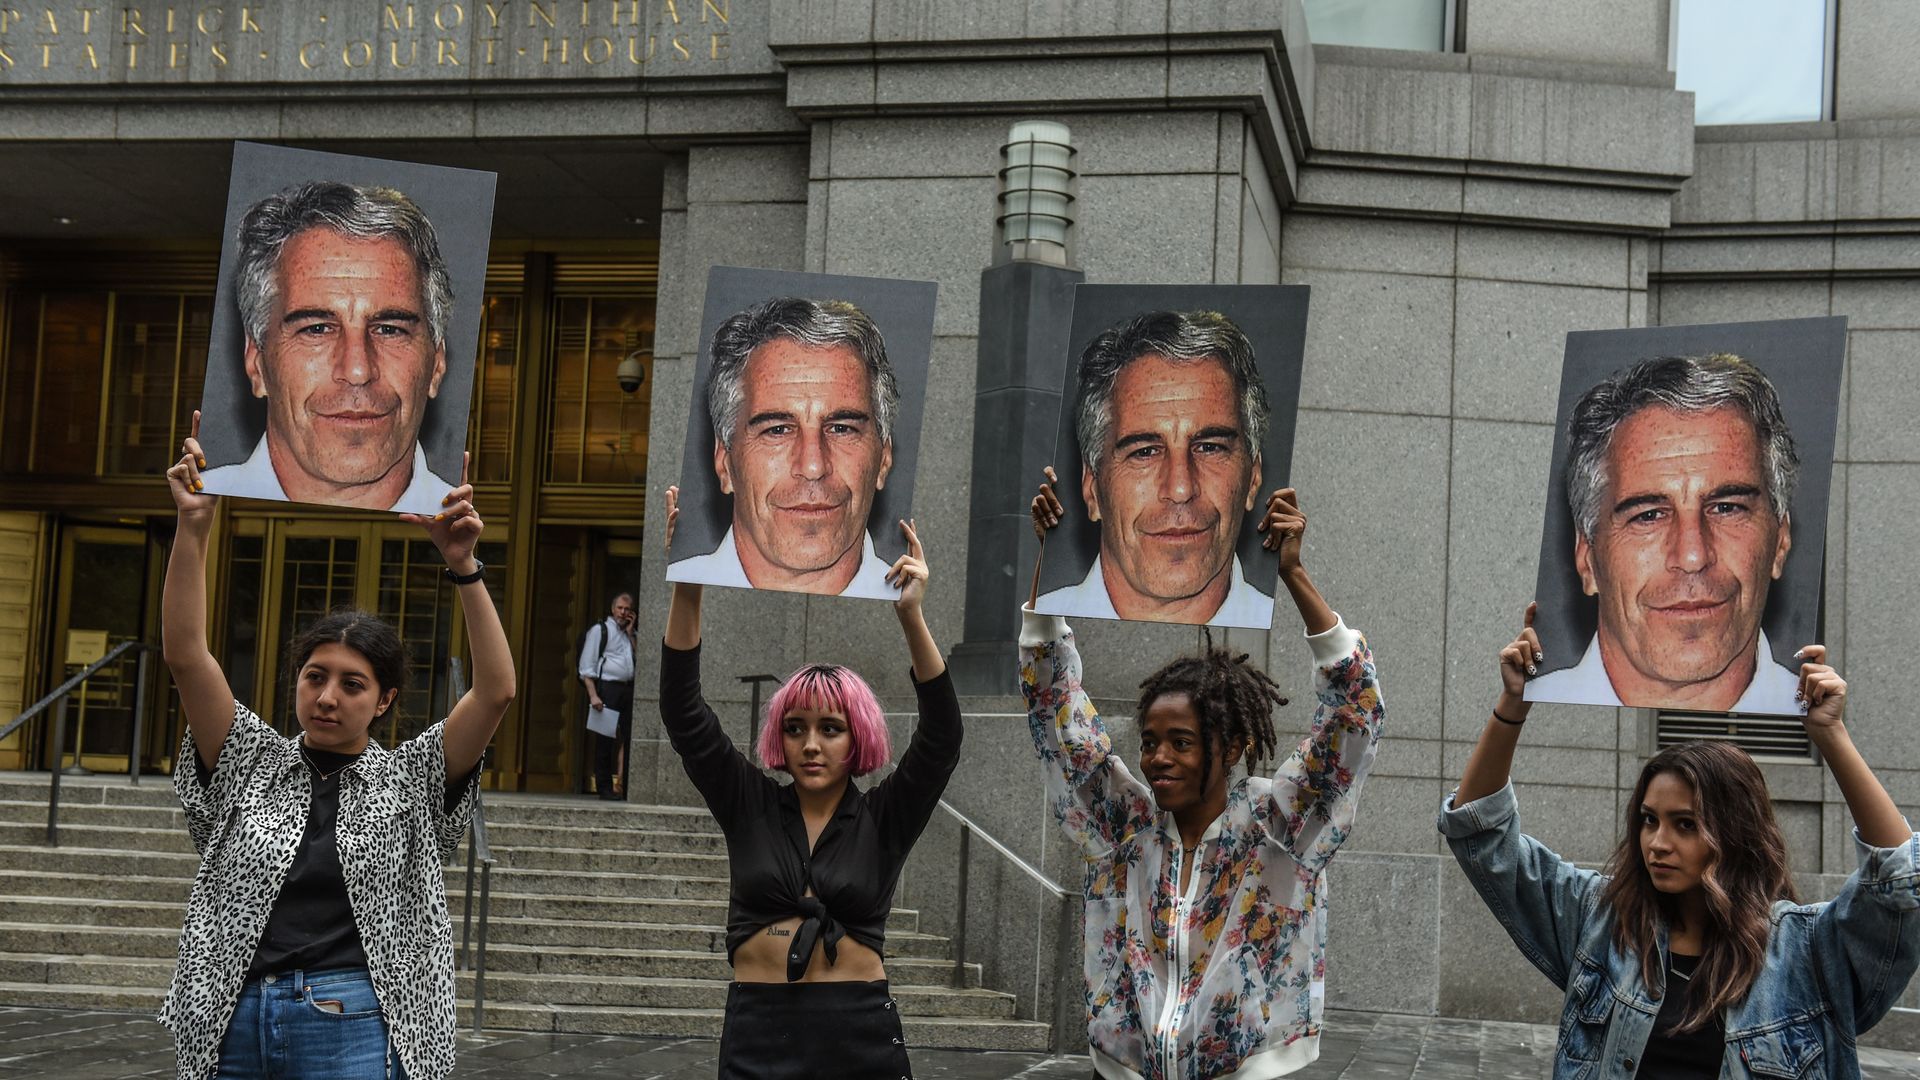 In this image, four people hold up signs of Jeffrey Epstein's face.